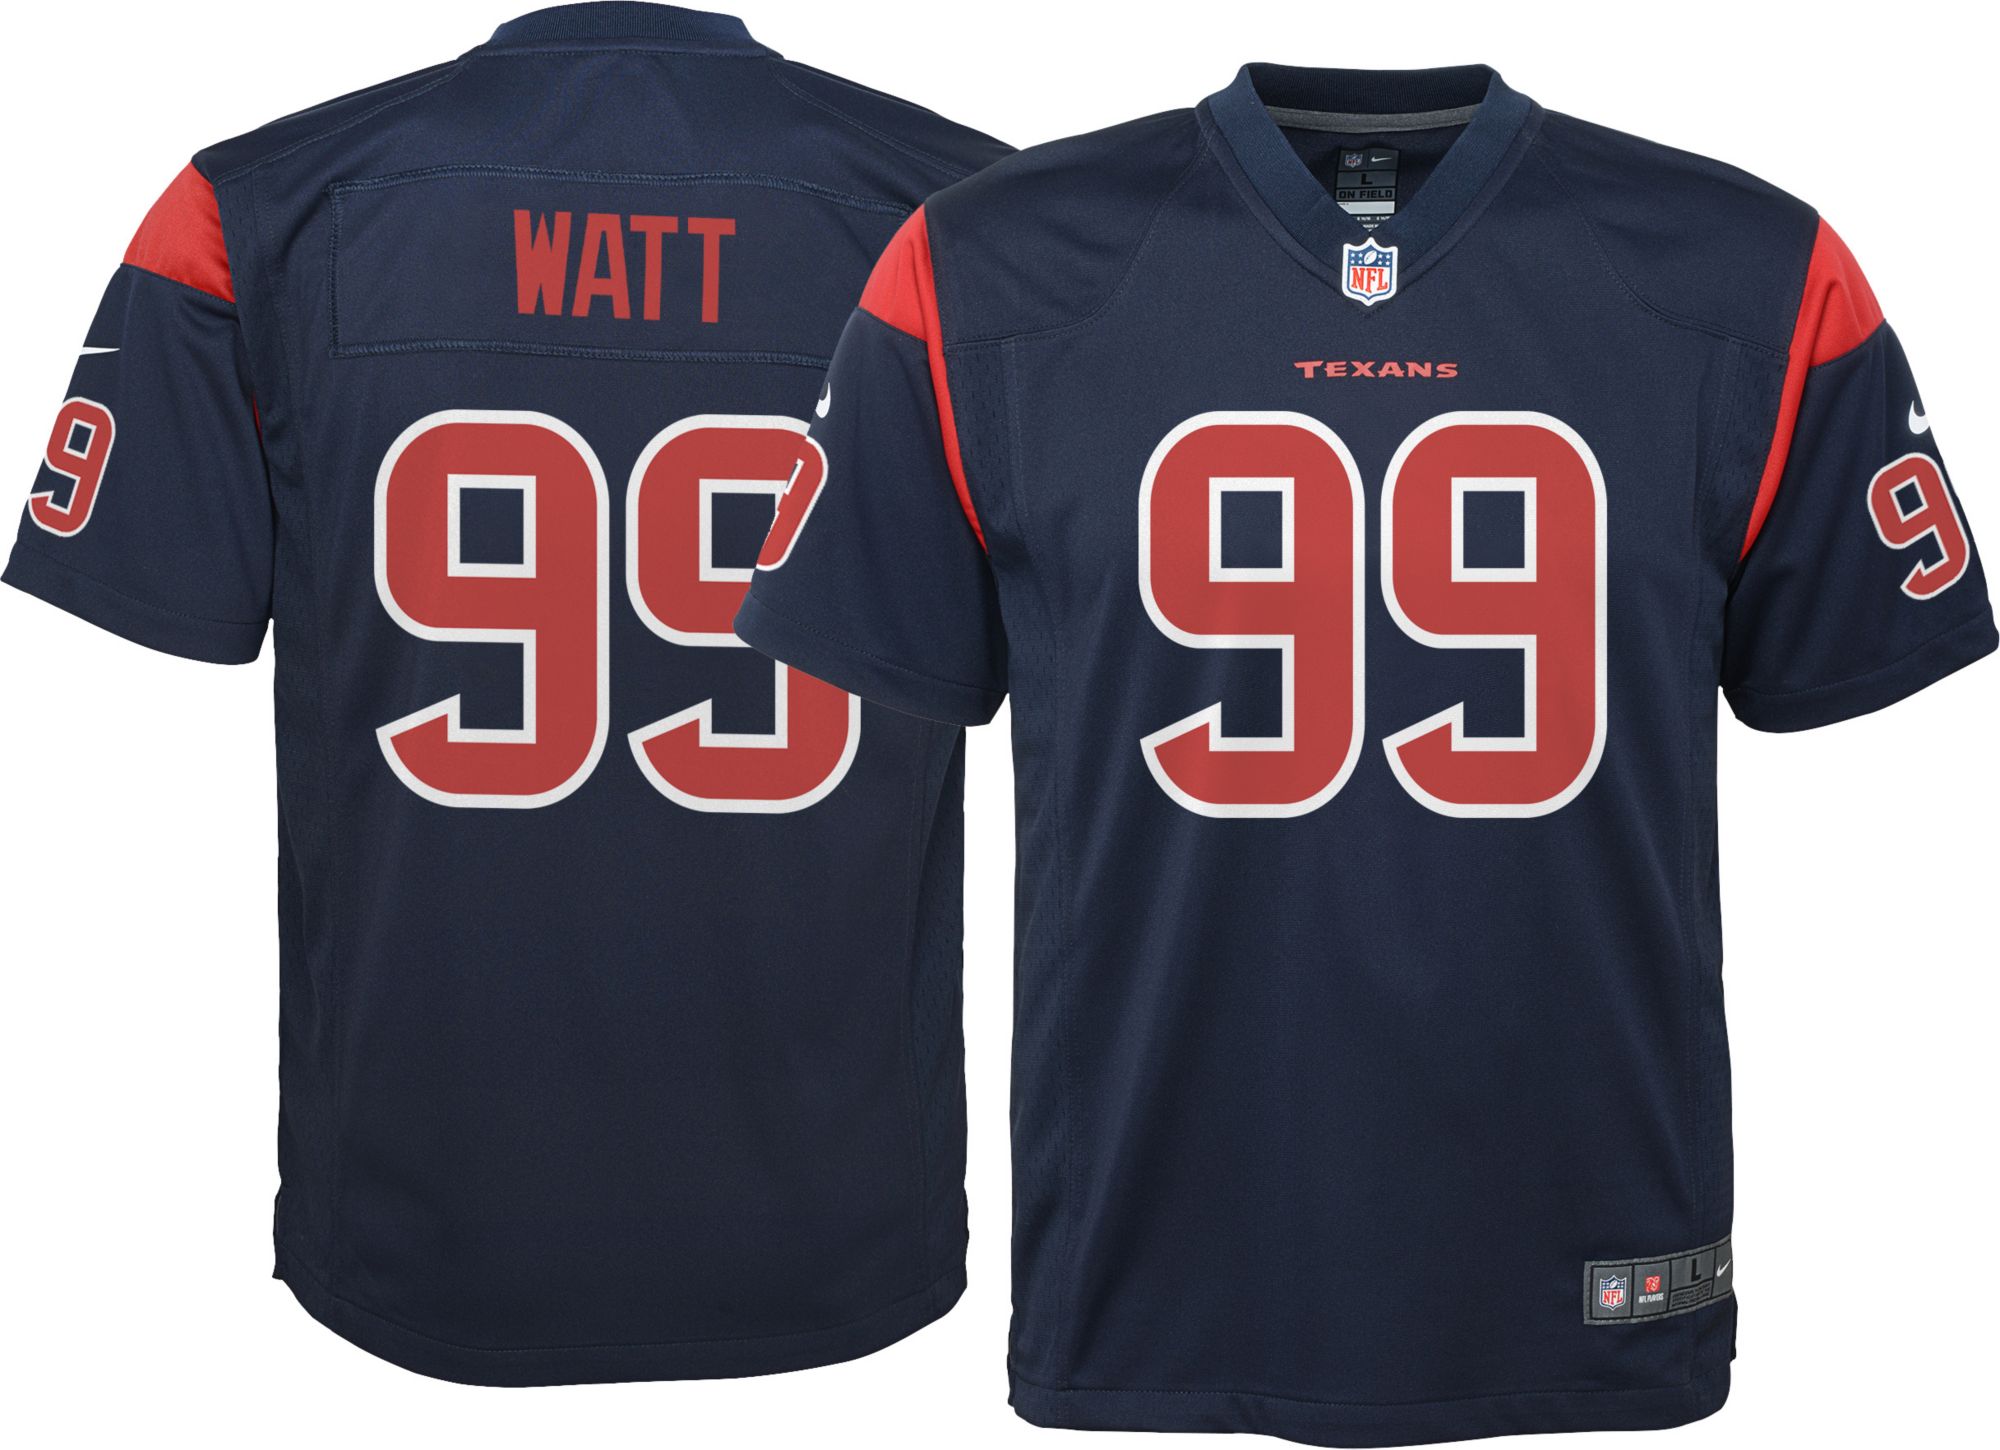 texans youth jersey